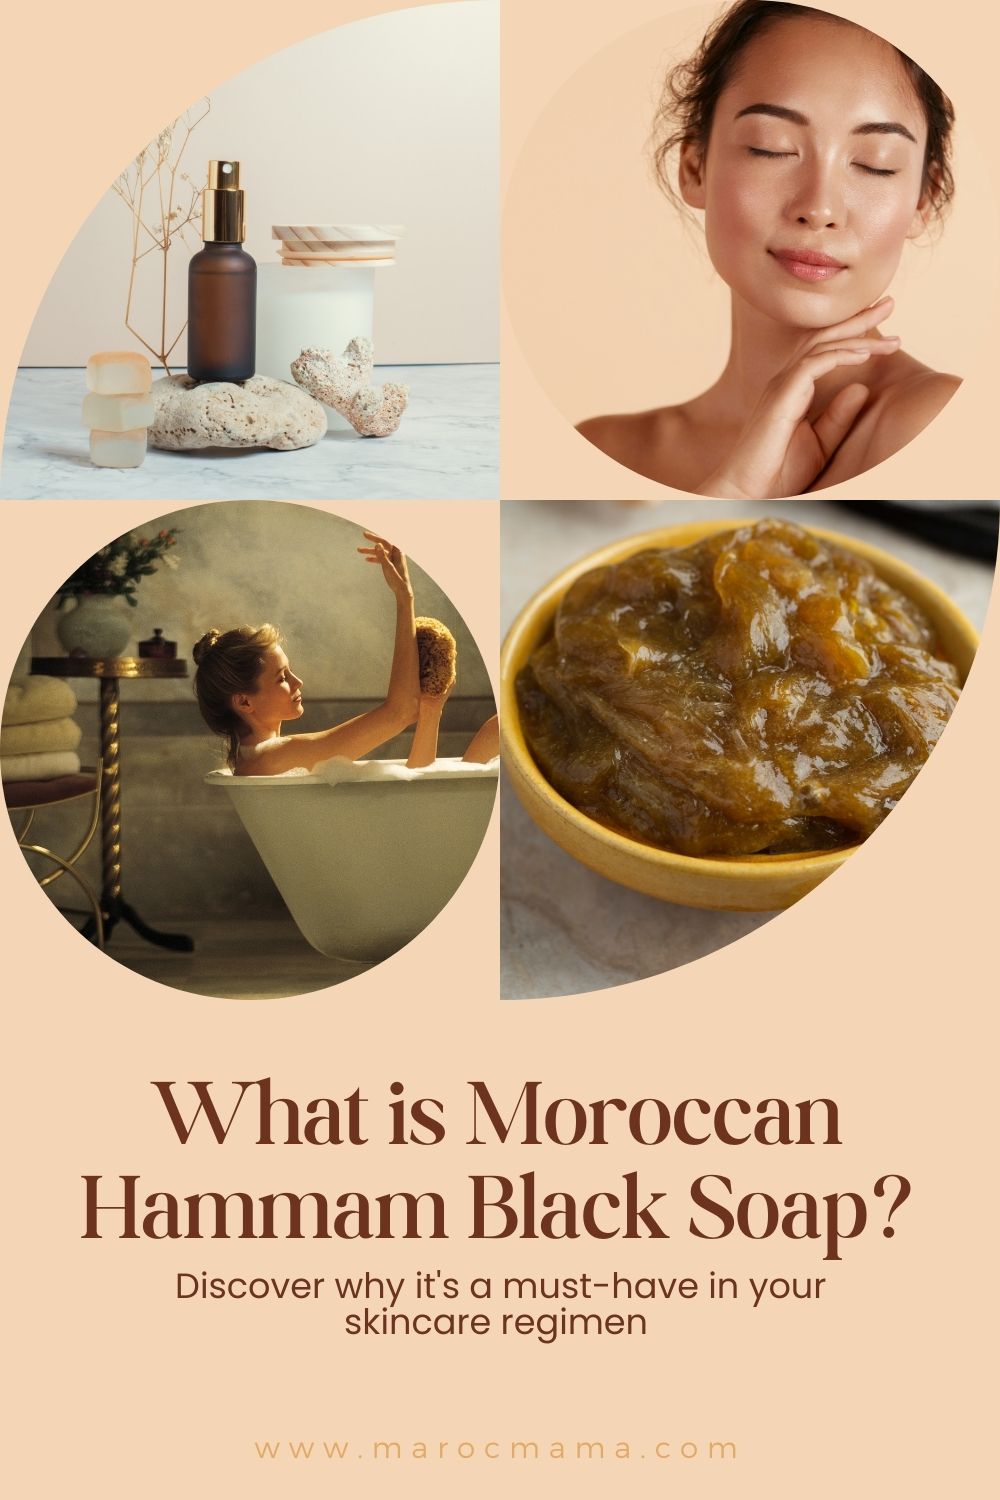 Moroccan black soap and skincare regimen with the text What is Moroccan Hammam Black Soap?